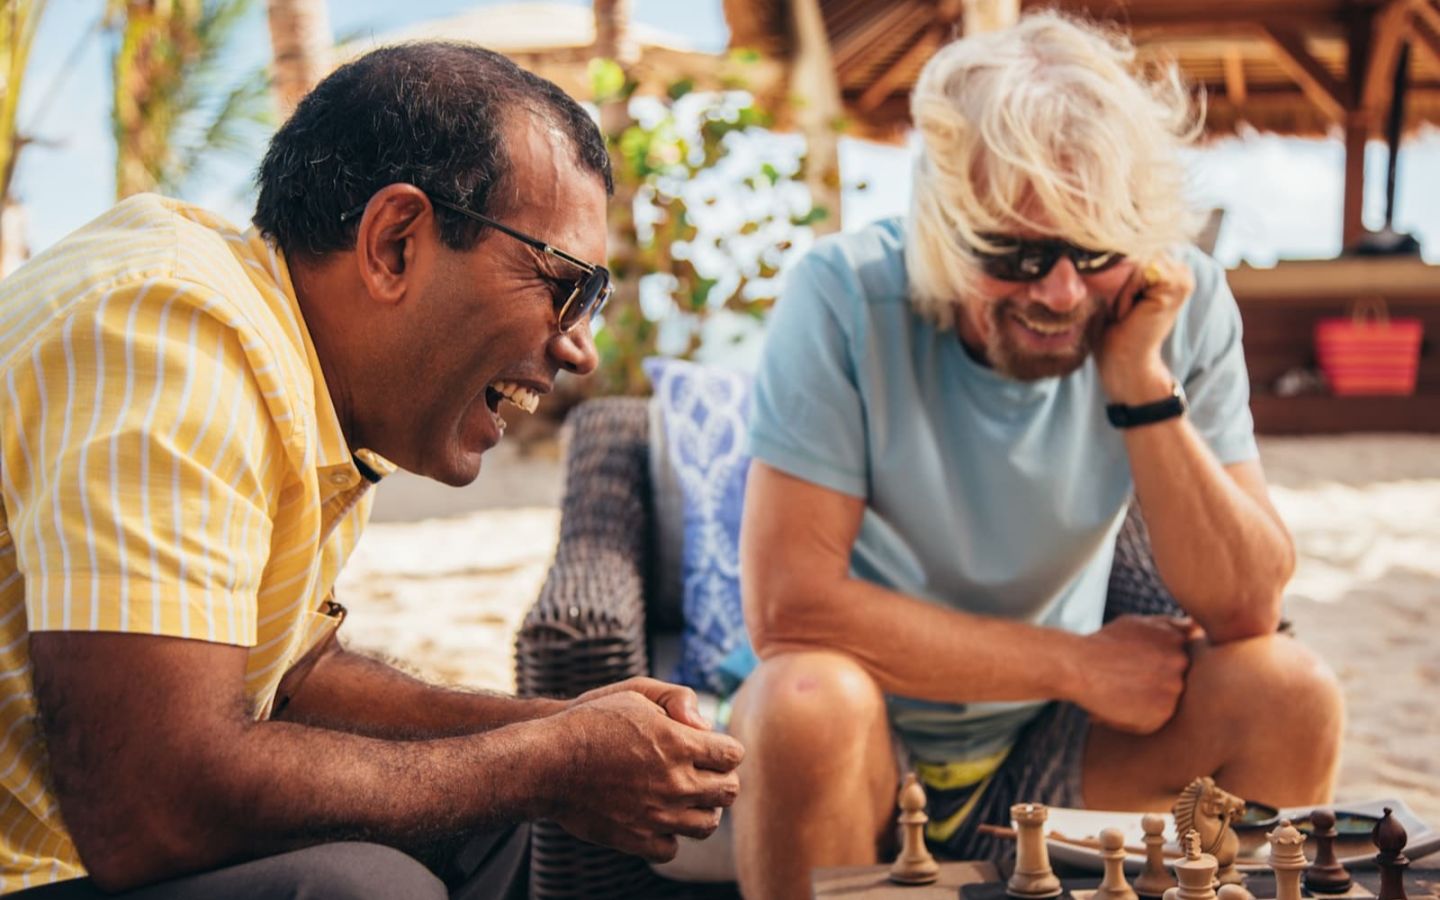 Richard Branson and Mohamed Nasheed laughing and playing chess